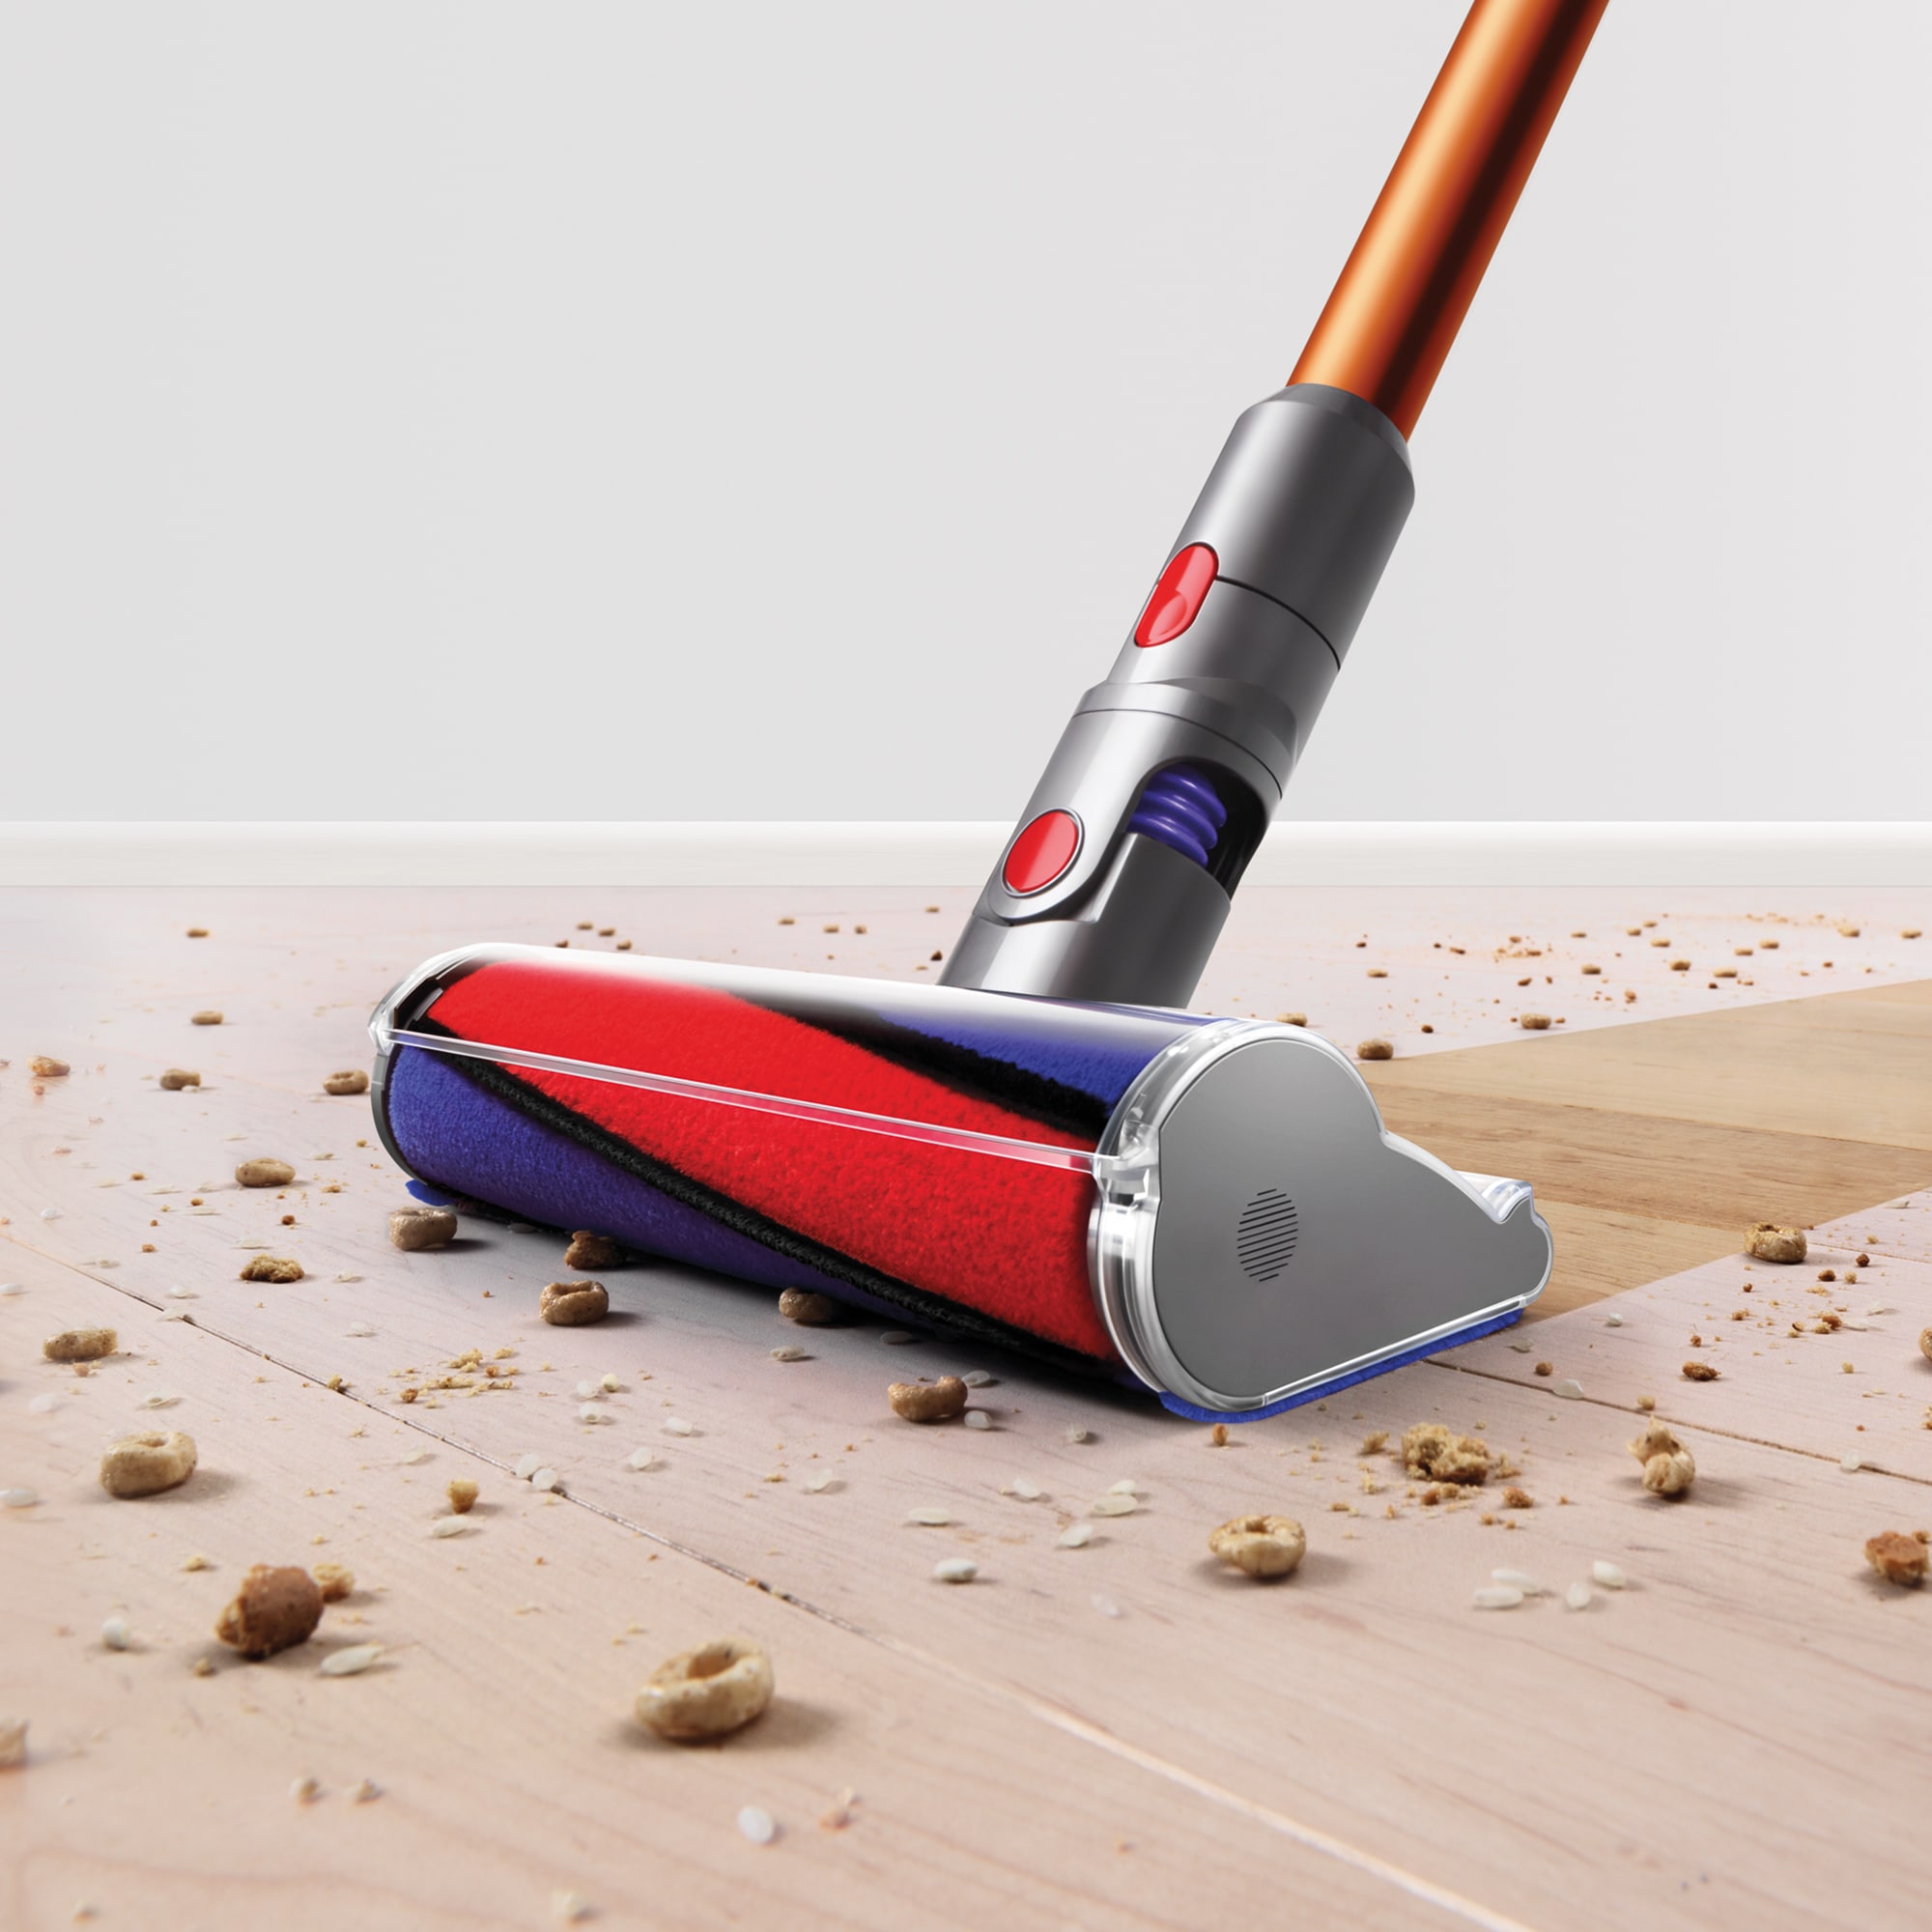 Dyson V10 Absolute Cordless Vacuum Cleaner 